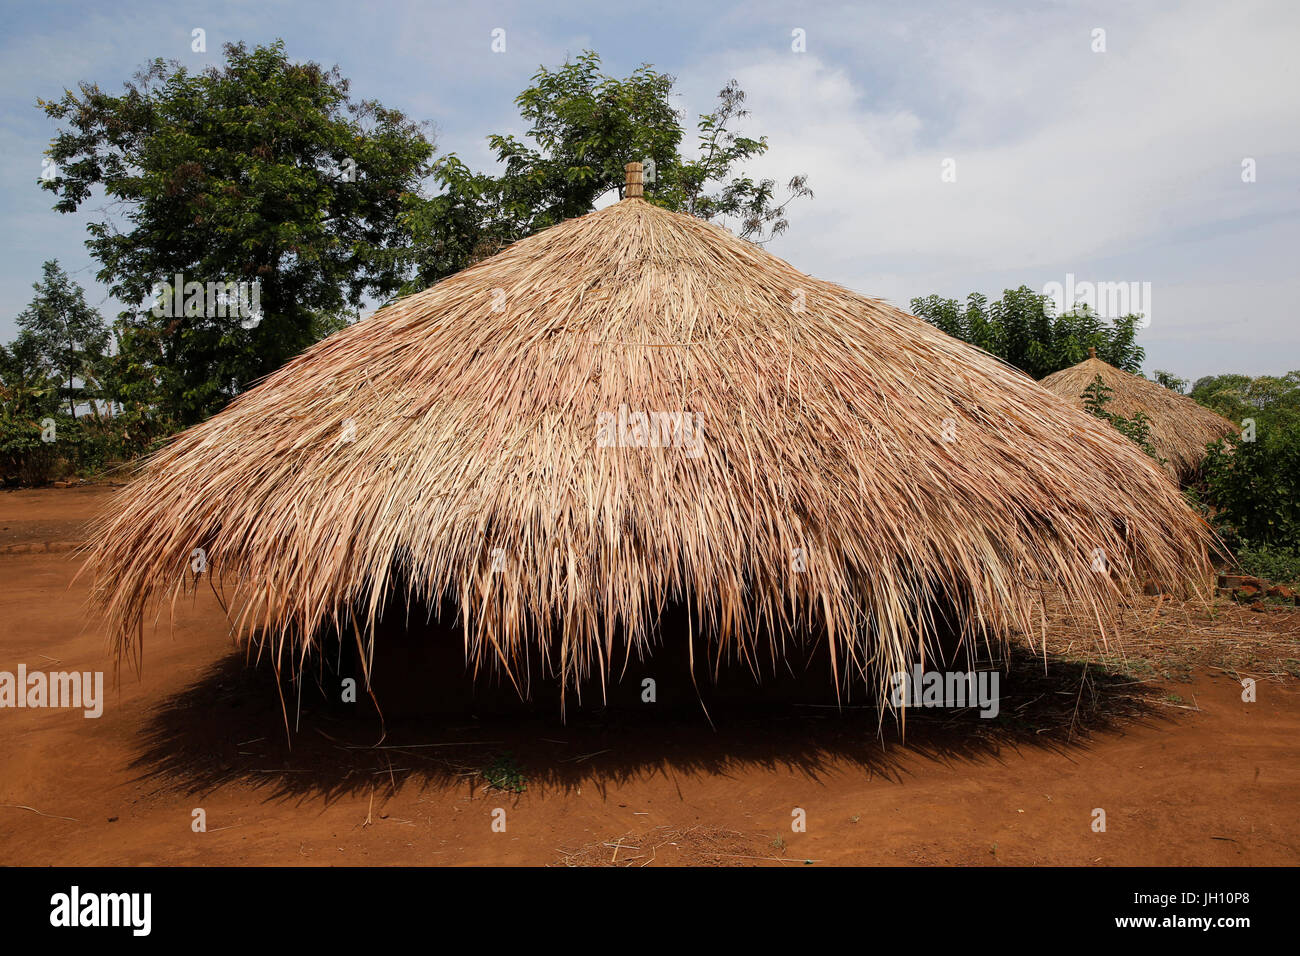 House with a thatched roof. Uganda. Stock Photo